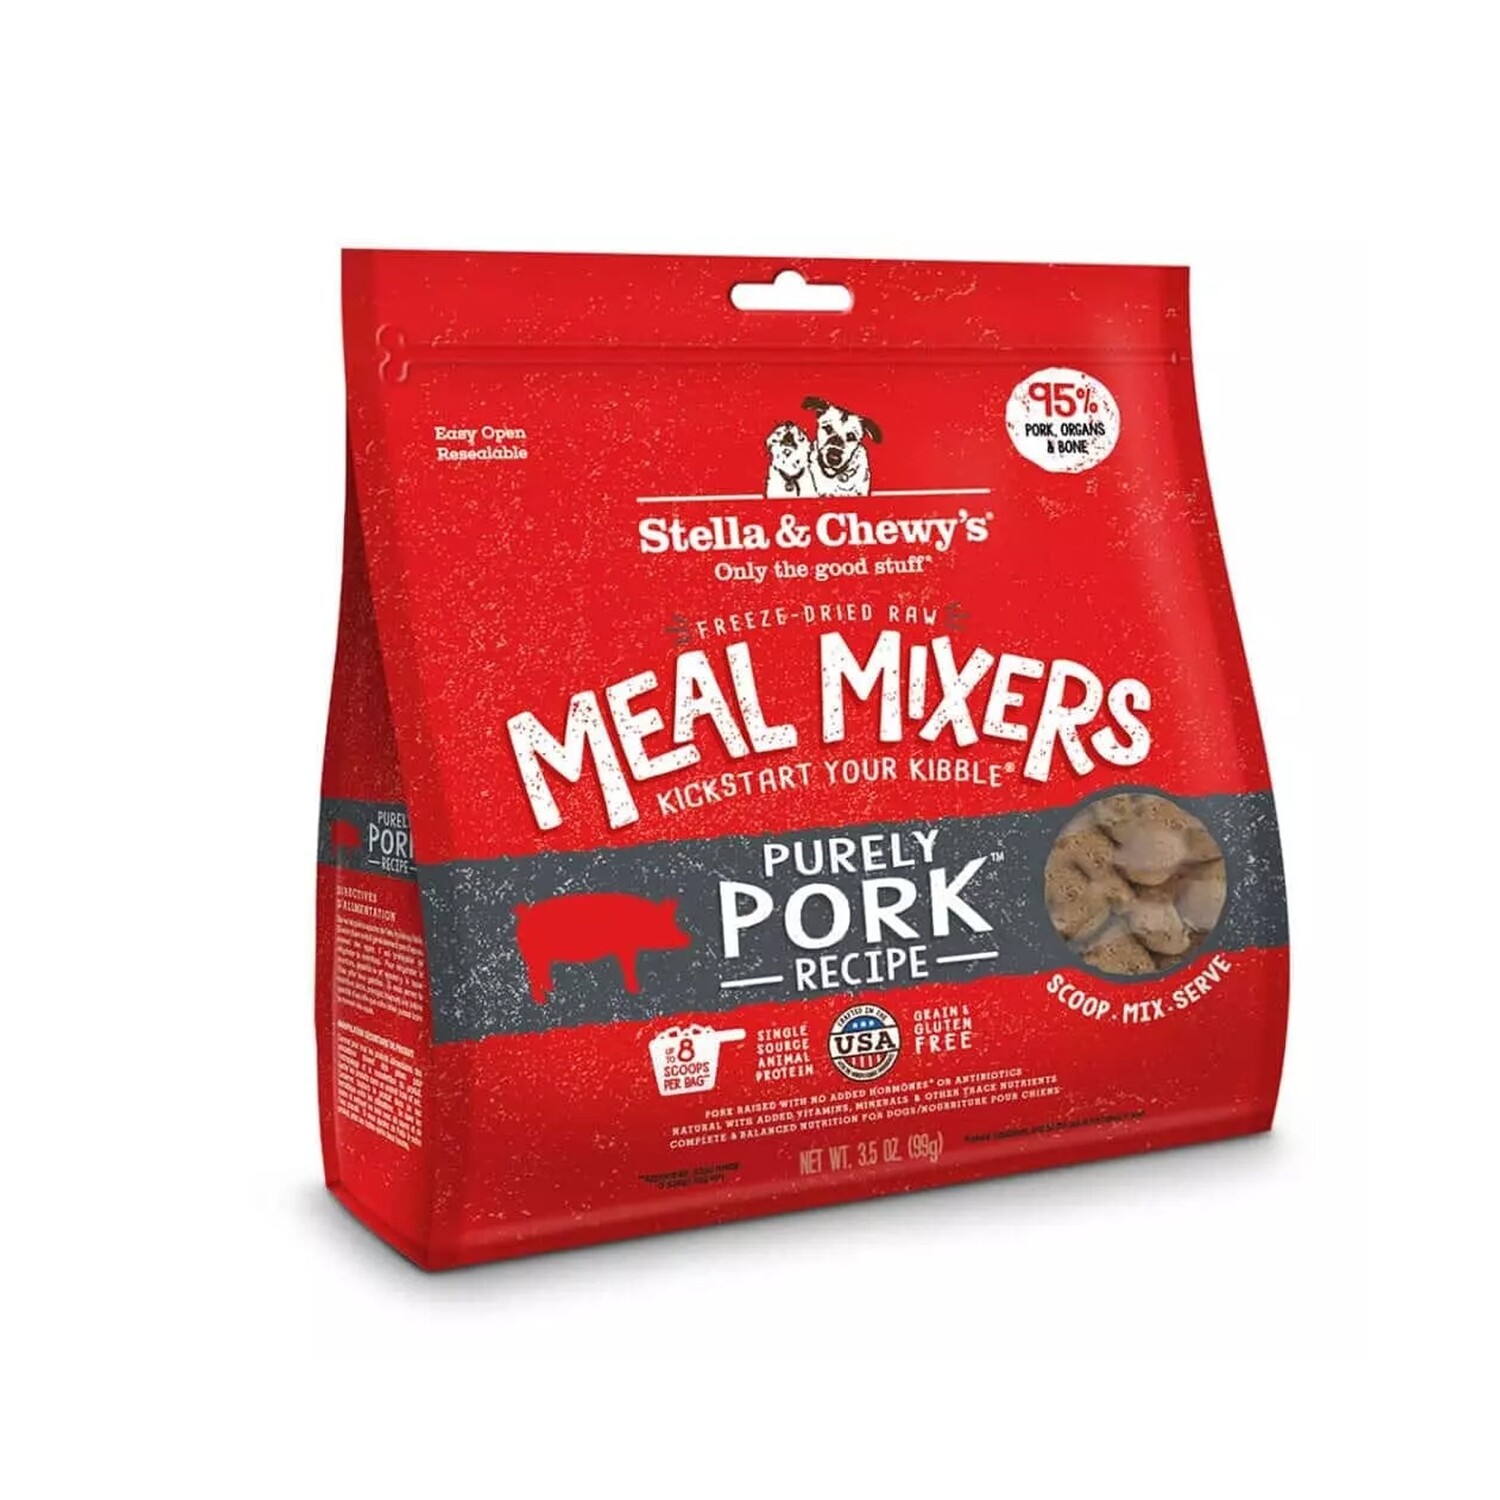 Stella & Chewy's Purely Pork Freeze-Dried Meal Mixer for Dog-3.5oz - 天然无谷冻干猪肉粒狗粮拌餐粉